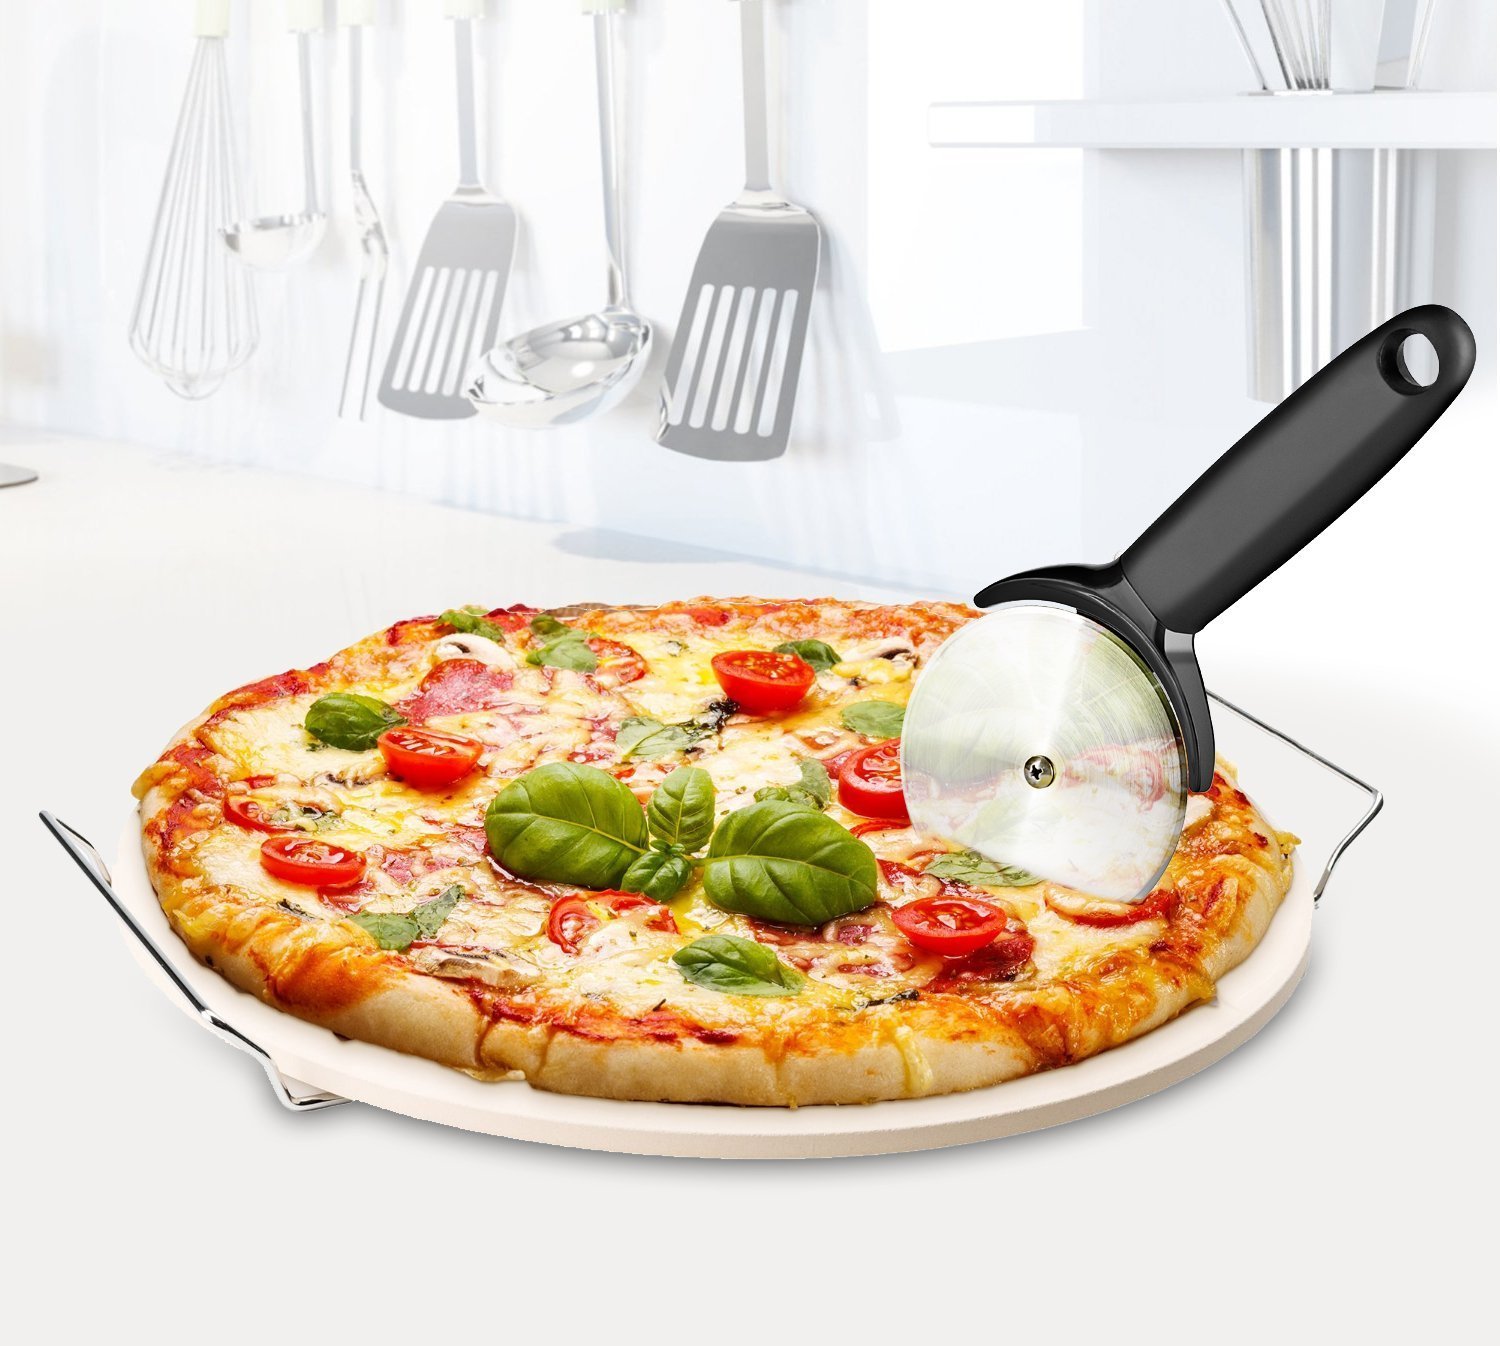 Chef's Star 15 Inch Ceramic Pizza Stone for Oven, Outdoor and Indoor Chrome Plated Serving Rack Pizza Pan with Pizza Cutter